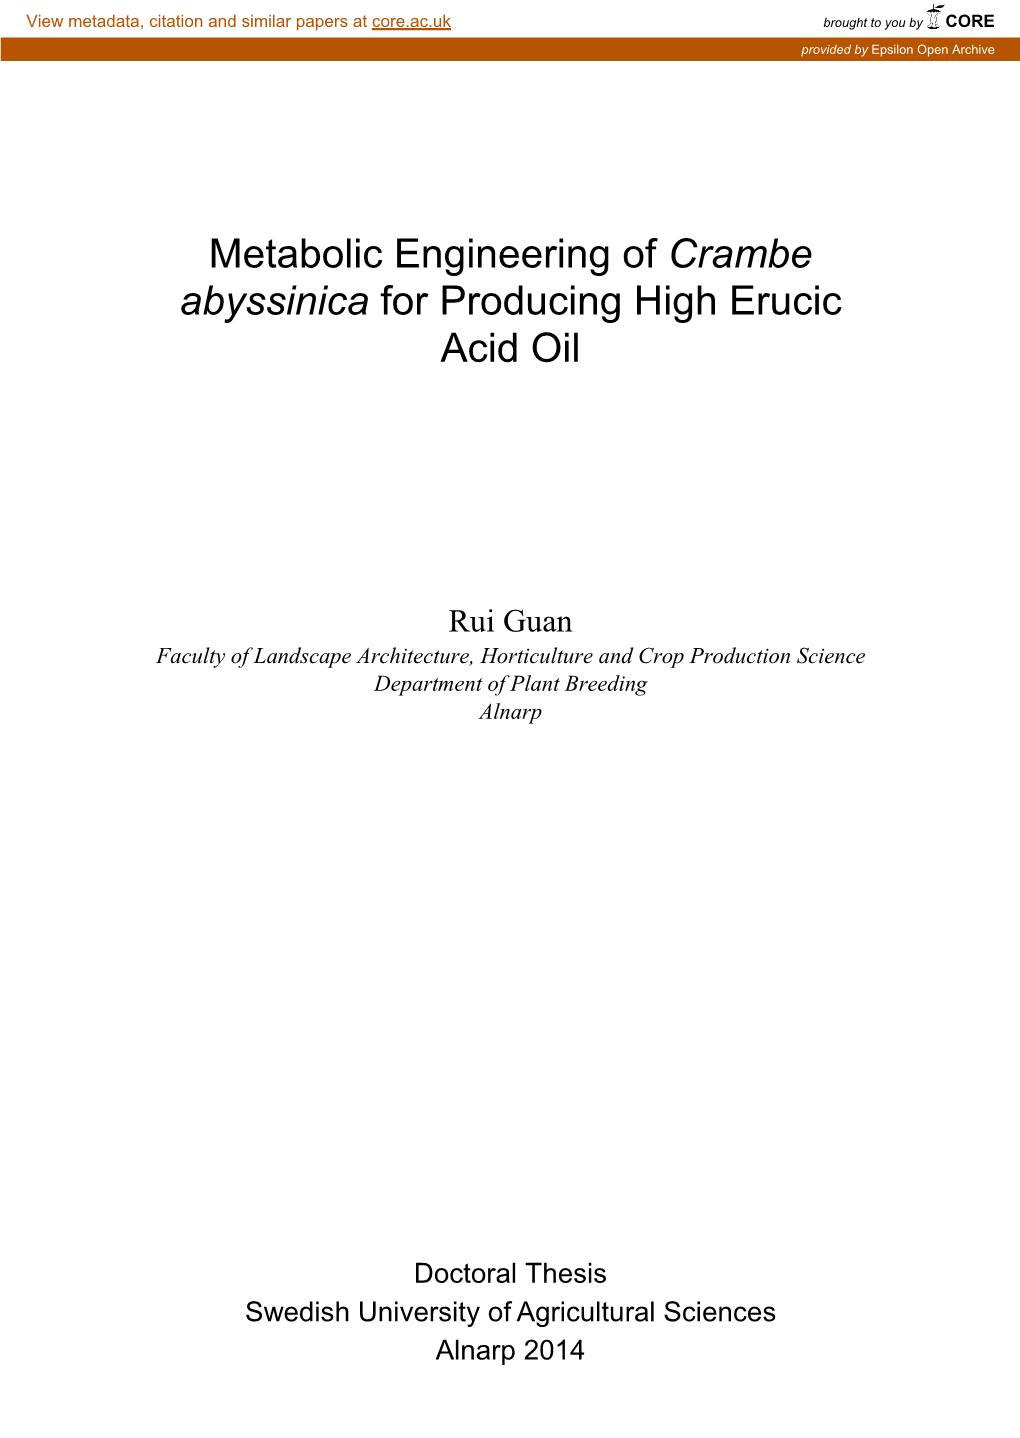 Metabolic Engineering of Crambe Abyssinica for Producing High Erucic Acid Oil